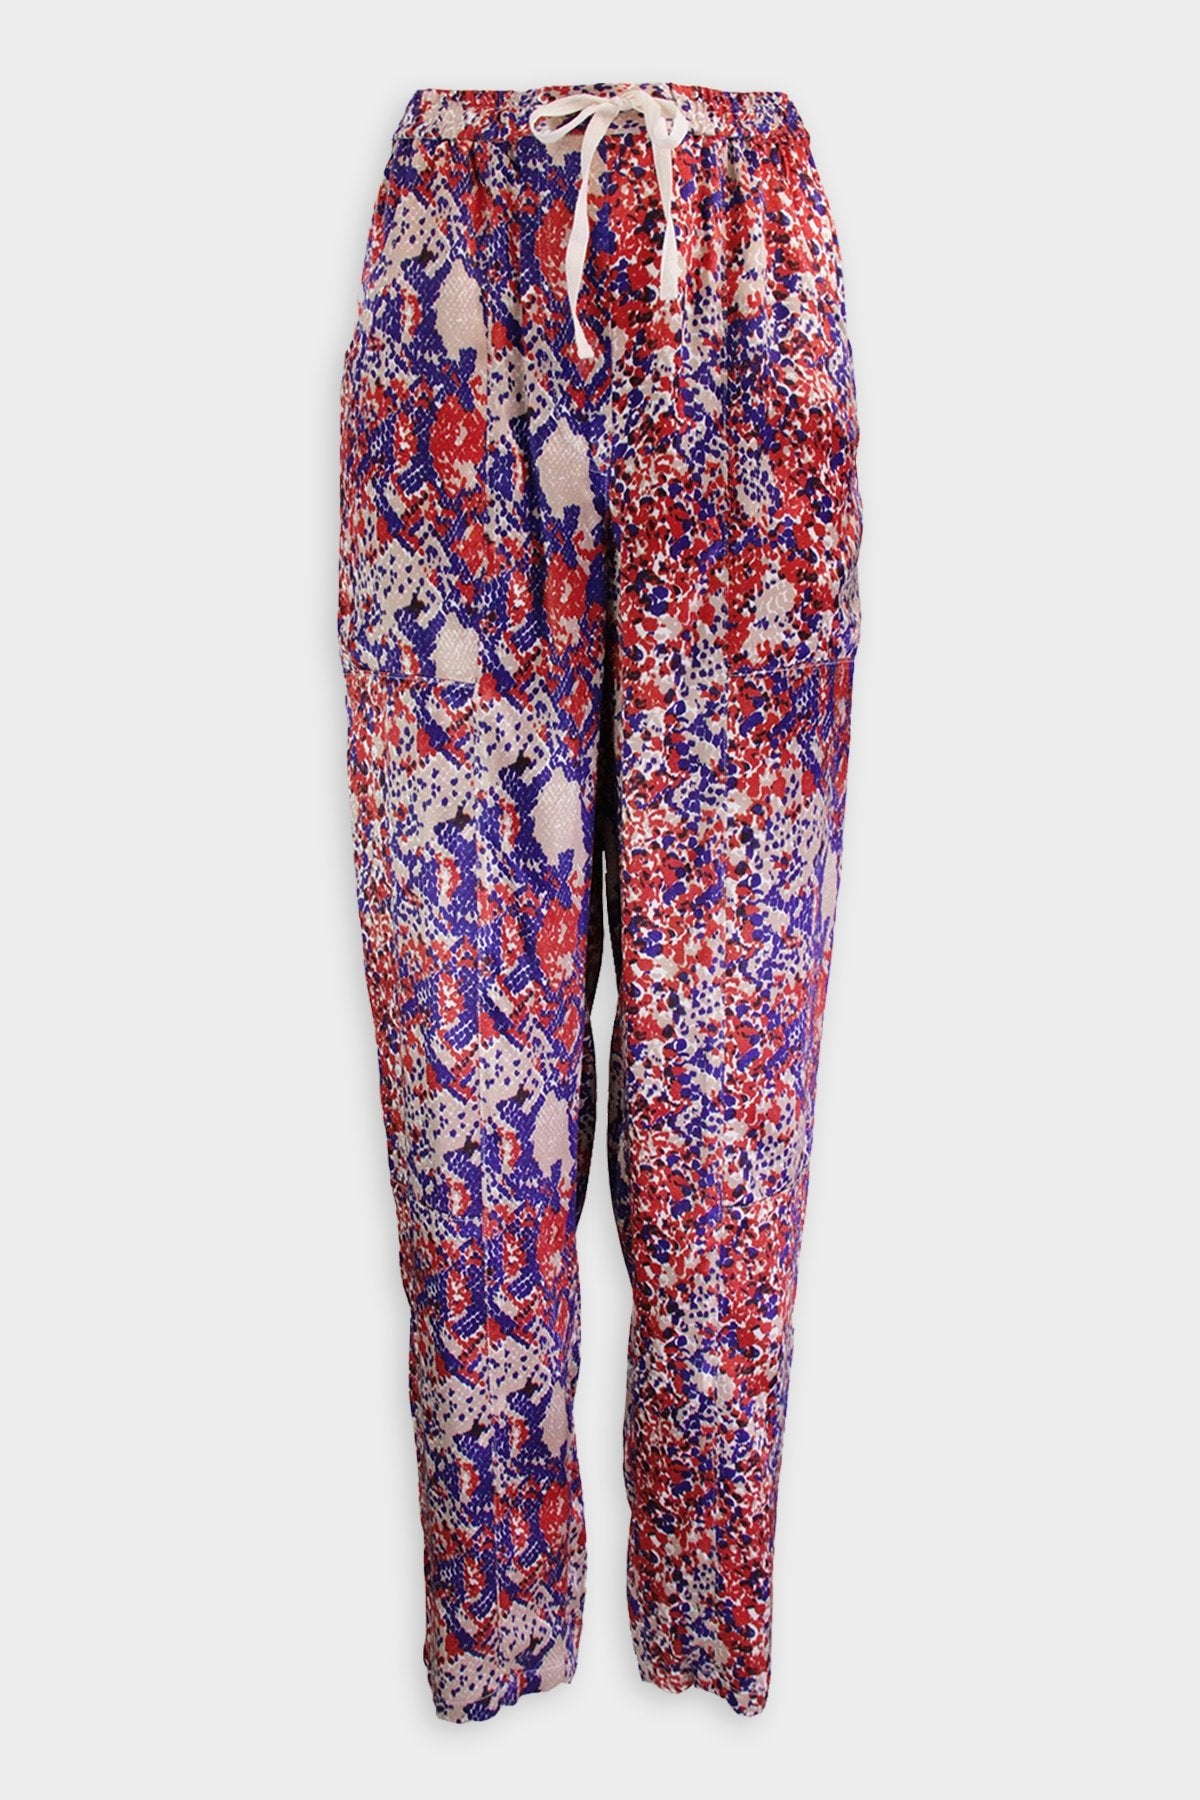 Linsley Pant in Red Multi - shop-olivia.com